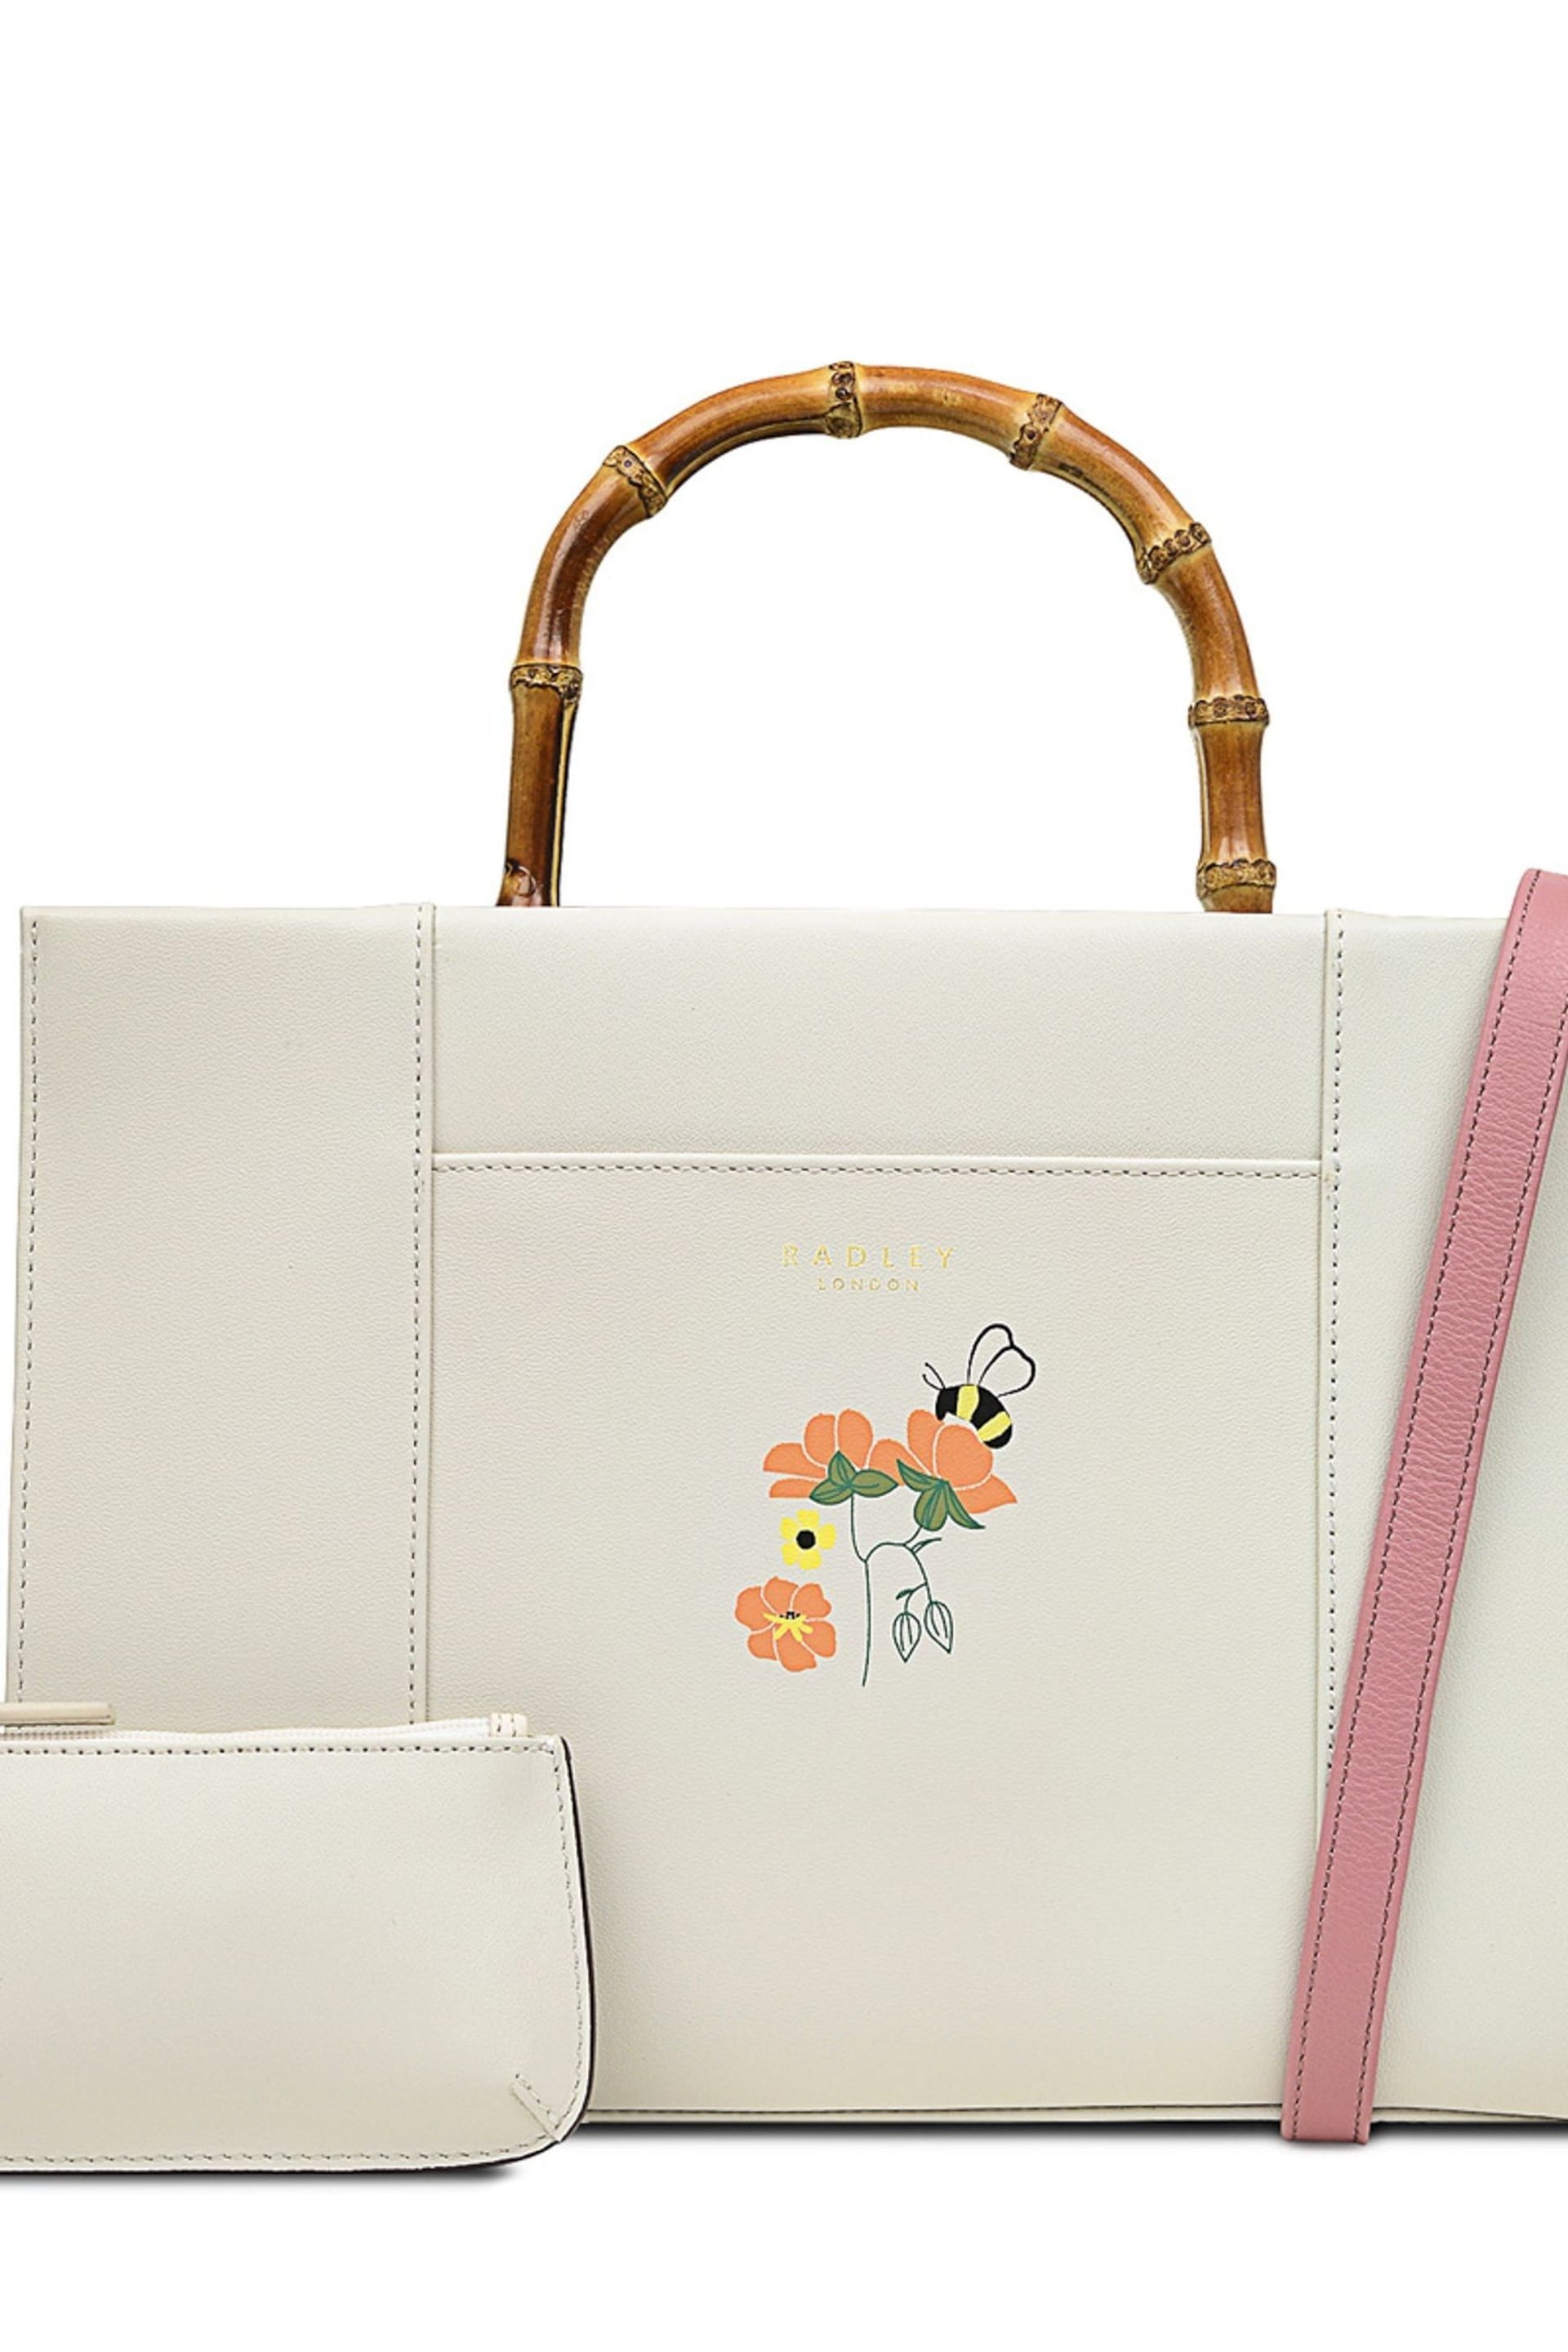 Radley London Medium The Rhs Collection 24 Zip Top Multiway White Bag - Image 3 of 4